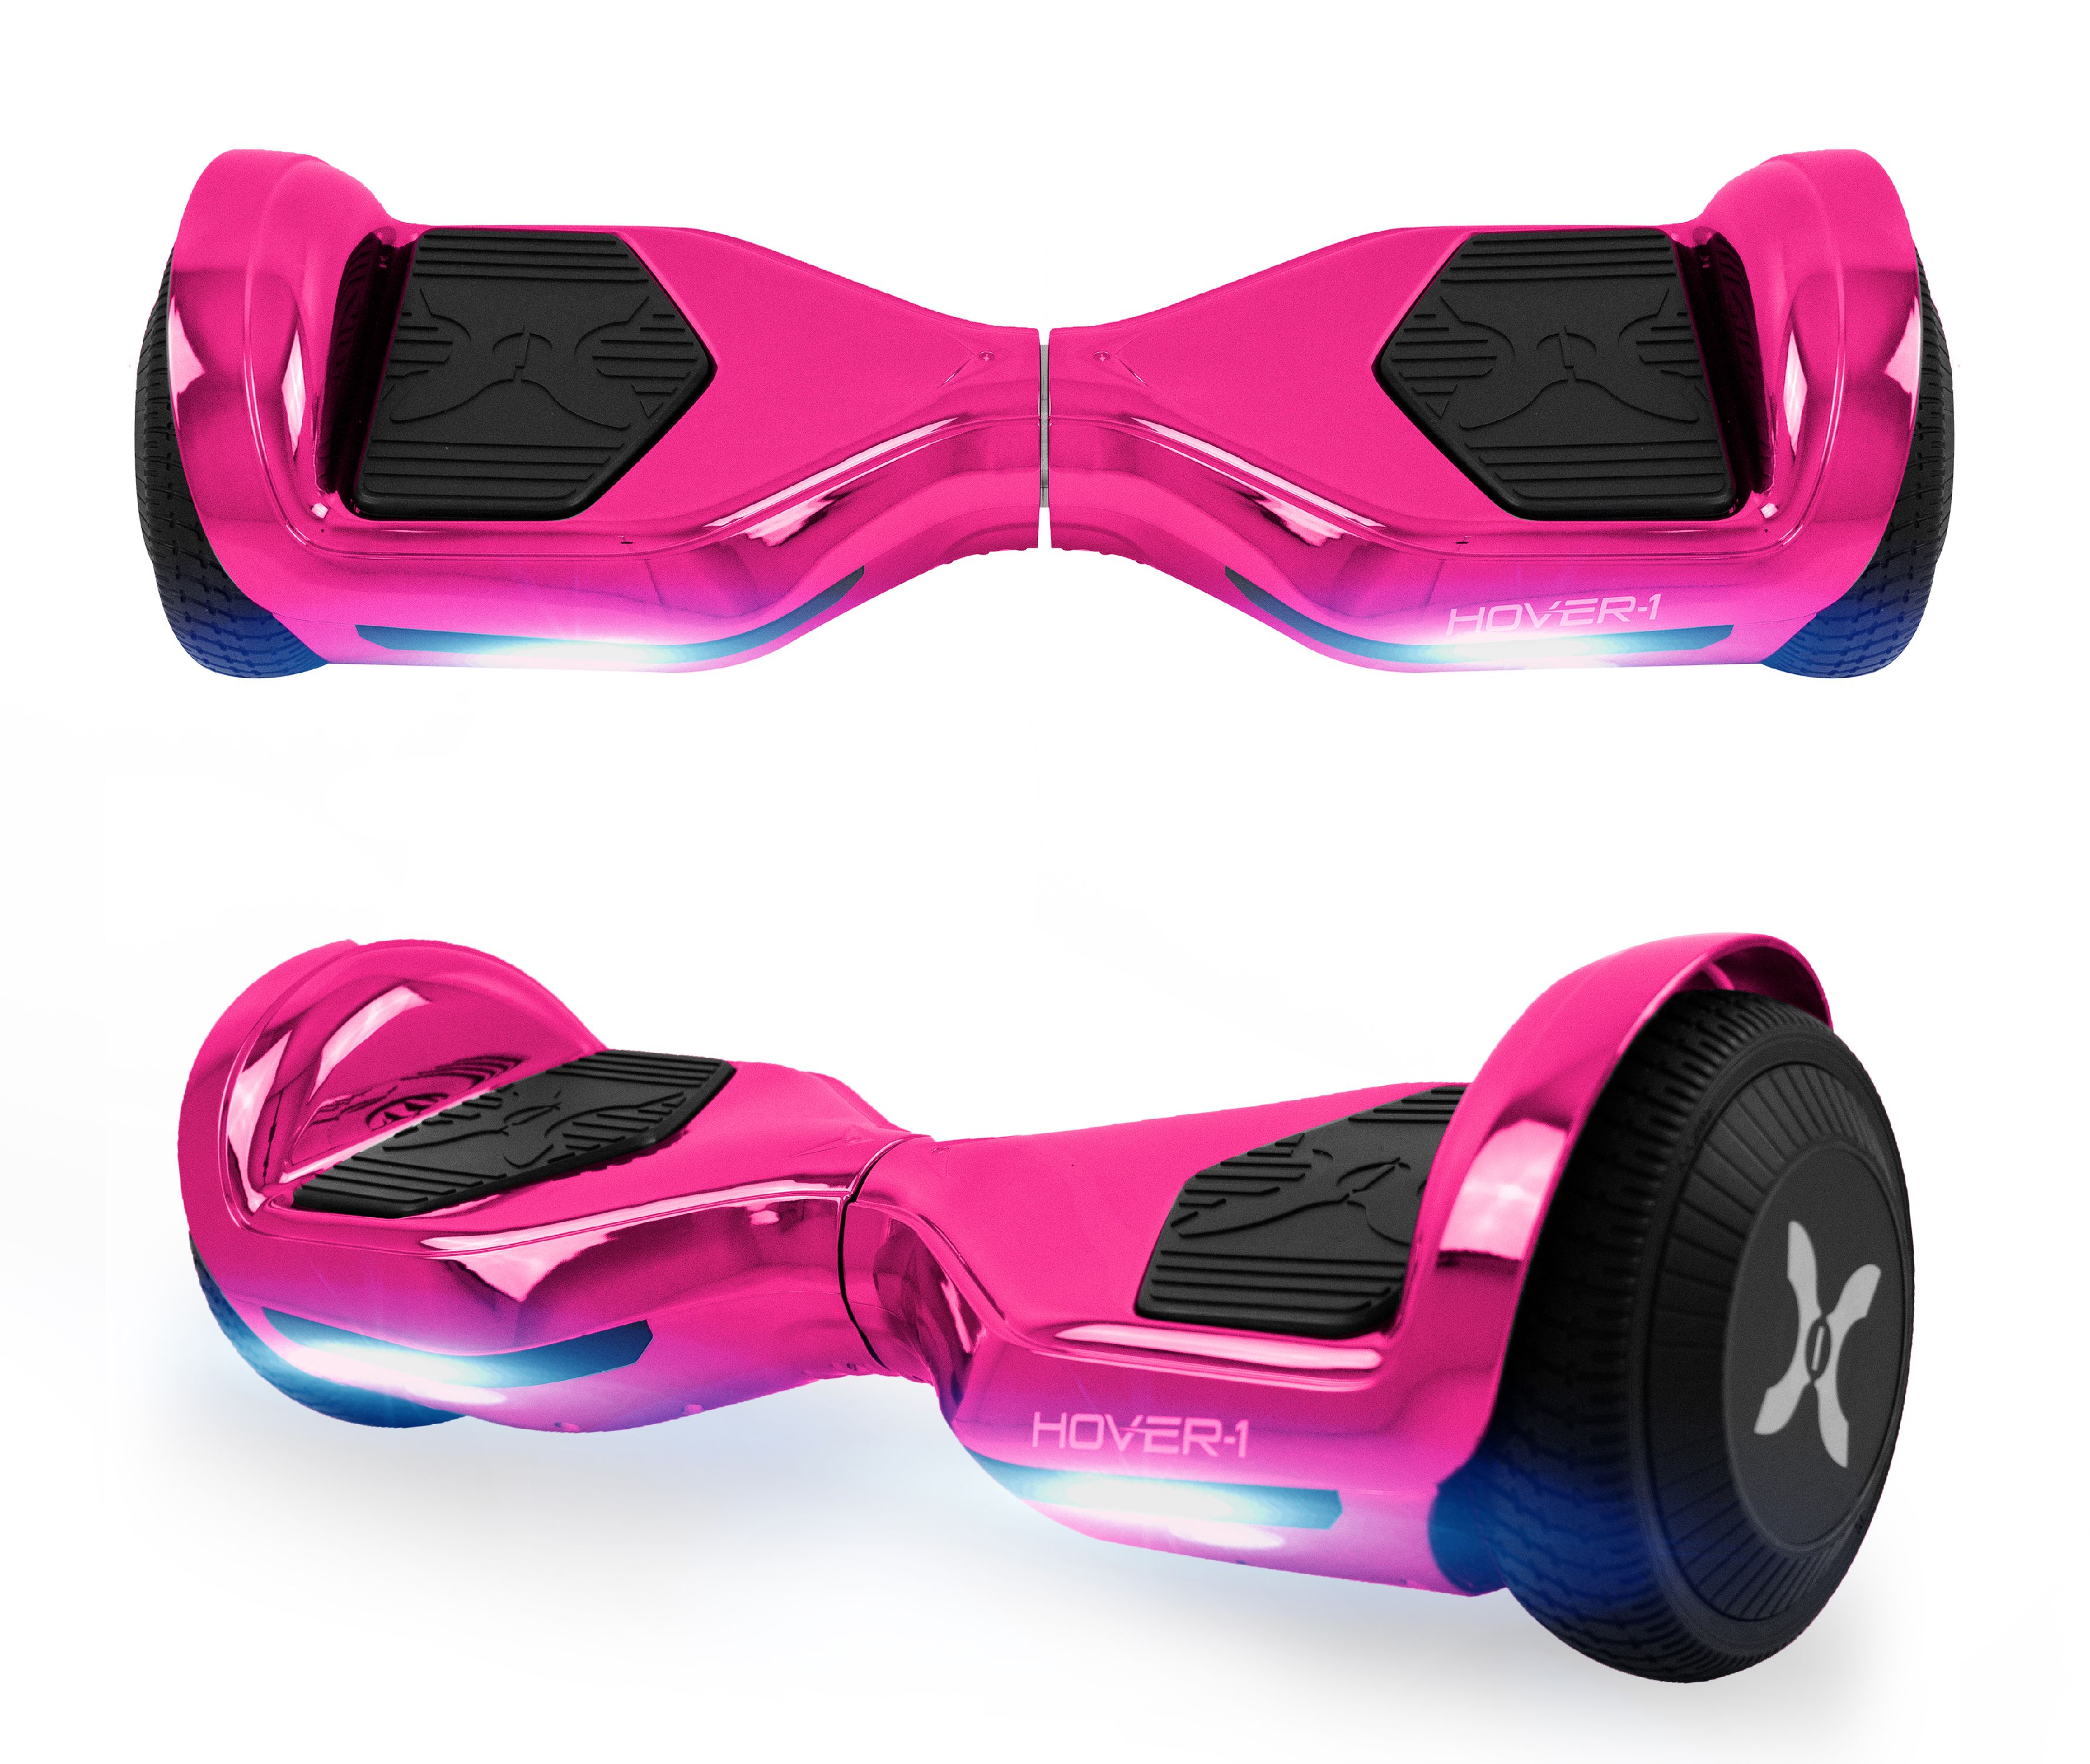 Hover-1 Allstar UL Certified Electric Hoverboard w/ 6.5" Wheels and LED Lights - Pink - image 1 of 6